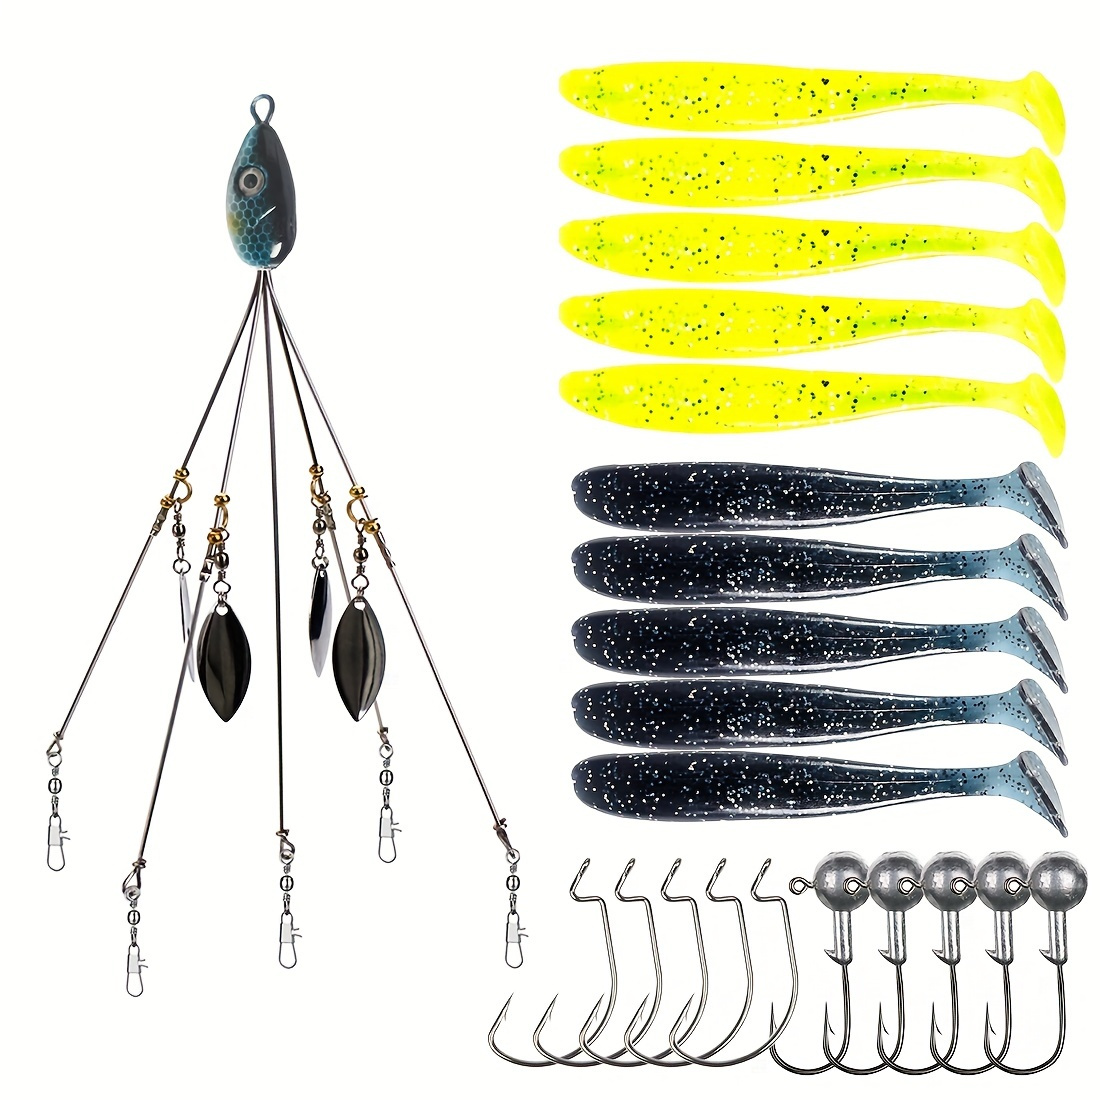 * Fishing Group 22 Pieces Suit Hanging 5 Baits Lure Subgroup Attack Fishing  Group Bait With Sequin Lure Sea Fishing * Bait